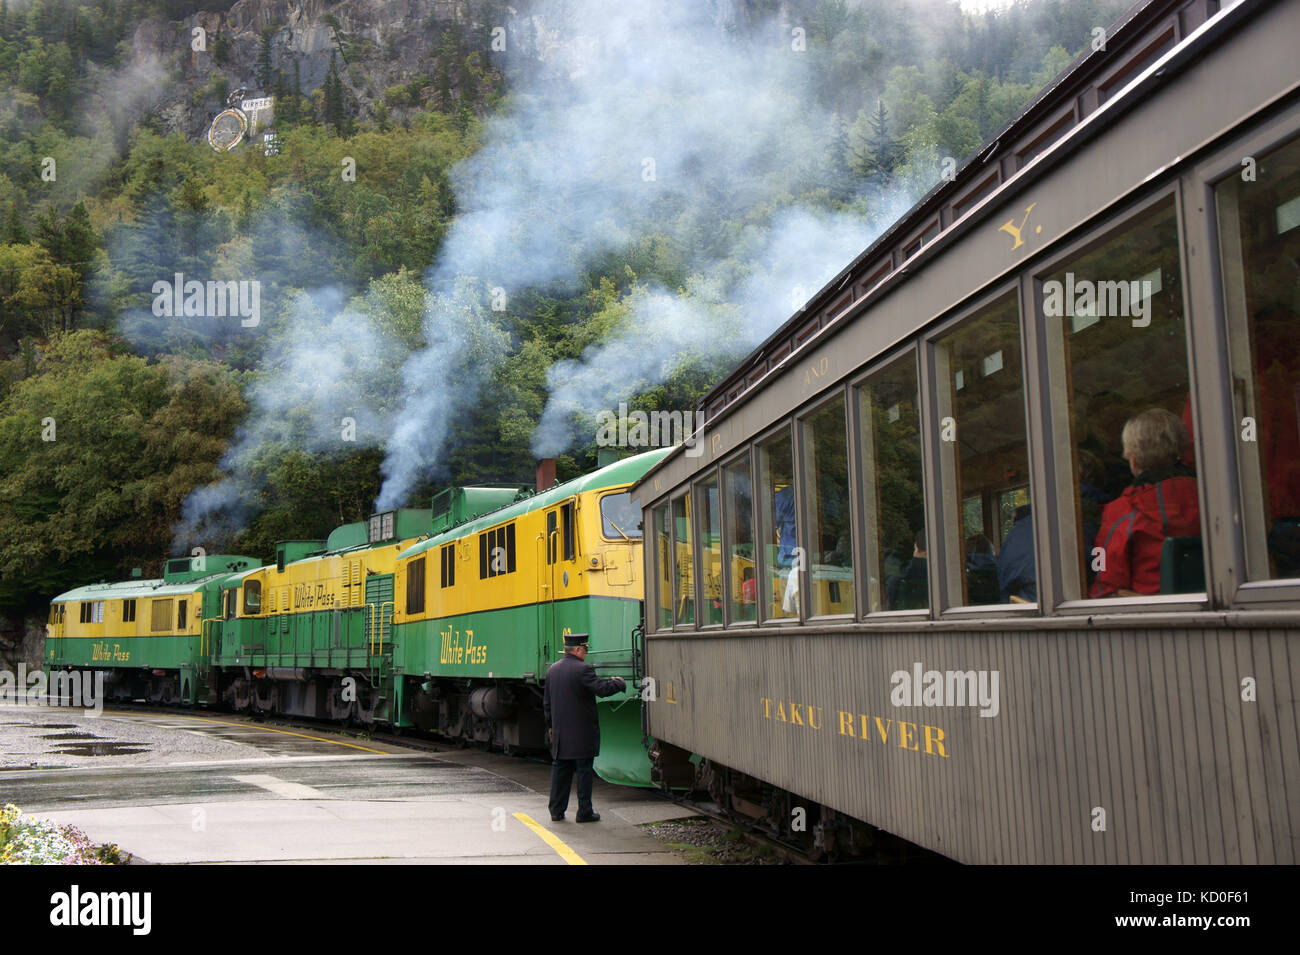 White Pass railroad trin with diesel engines and historic passenger car leaving staion at Skagway, Alaska Stock Photo